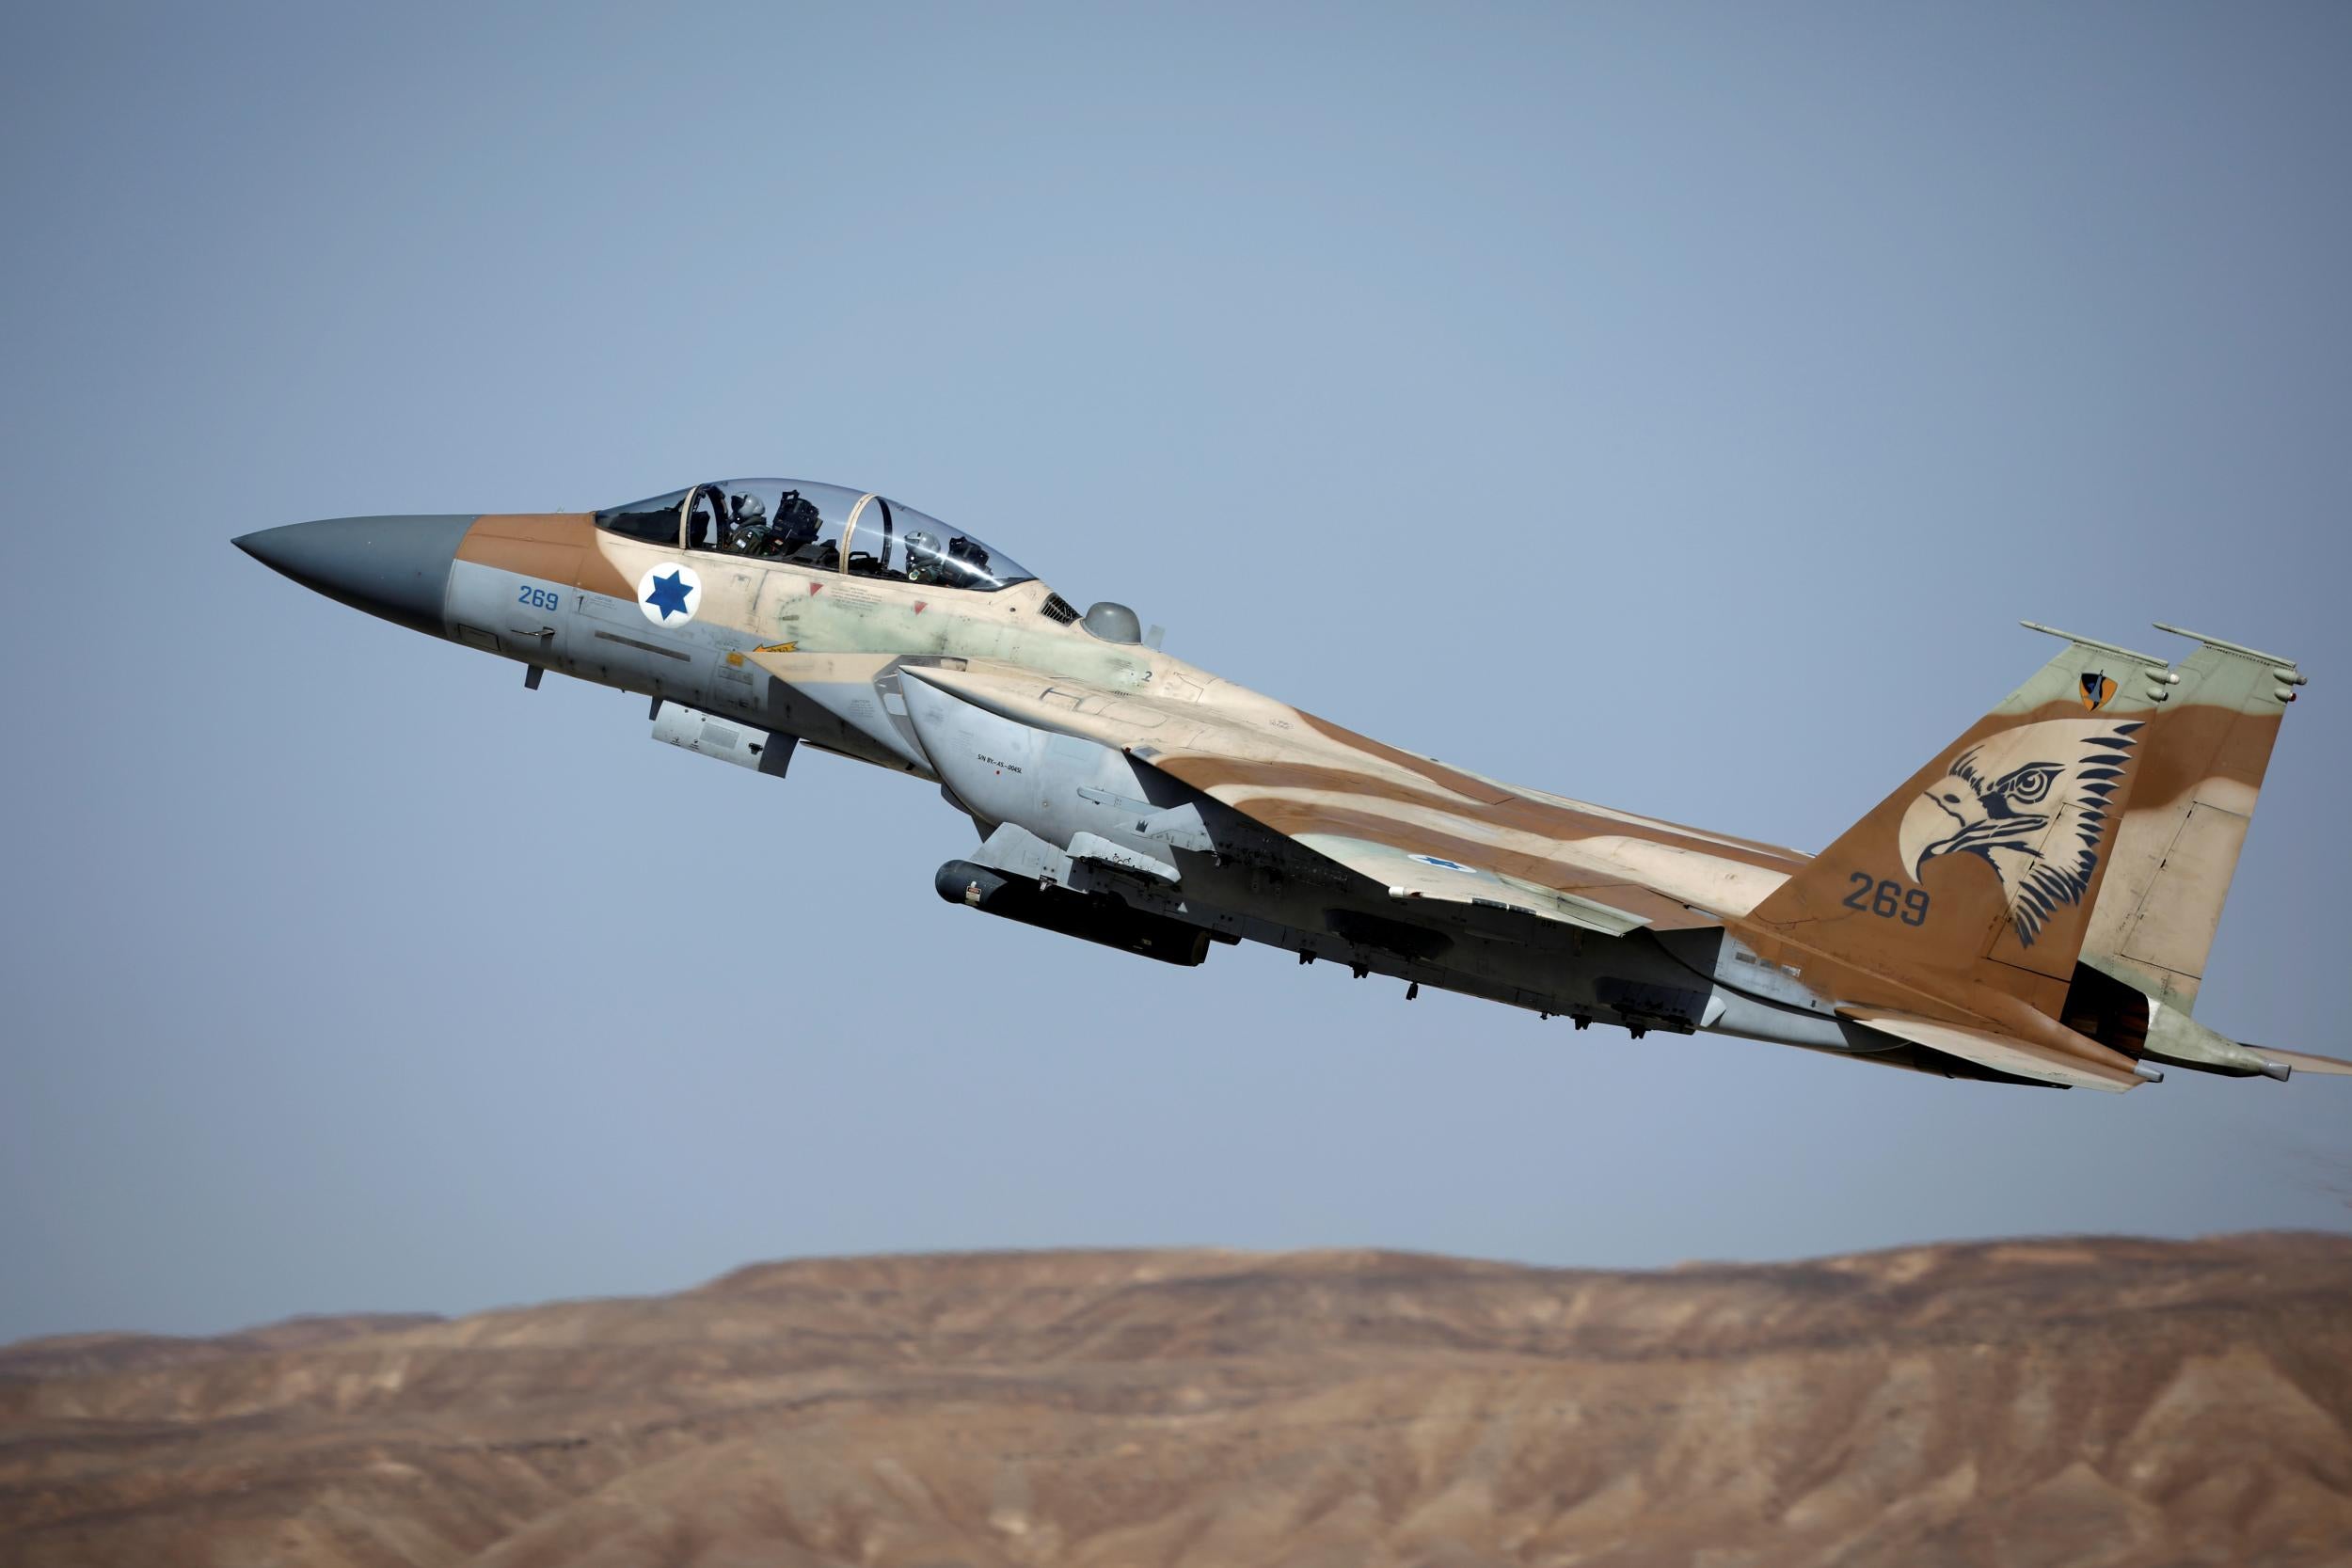 An Israeli F-15 fighter jet takes off during an exercise at Ovda Military Airbase in southern Israel in this file photo from 16 May 2017